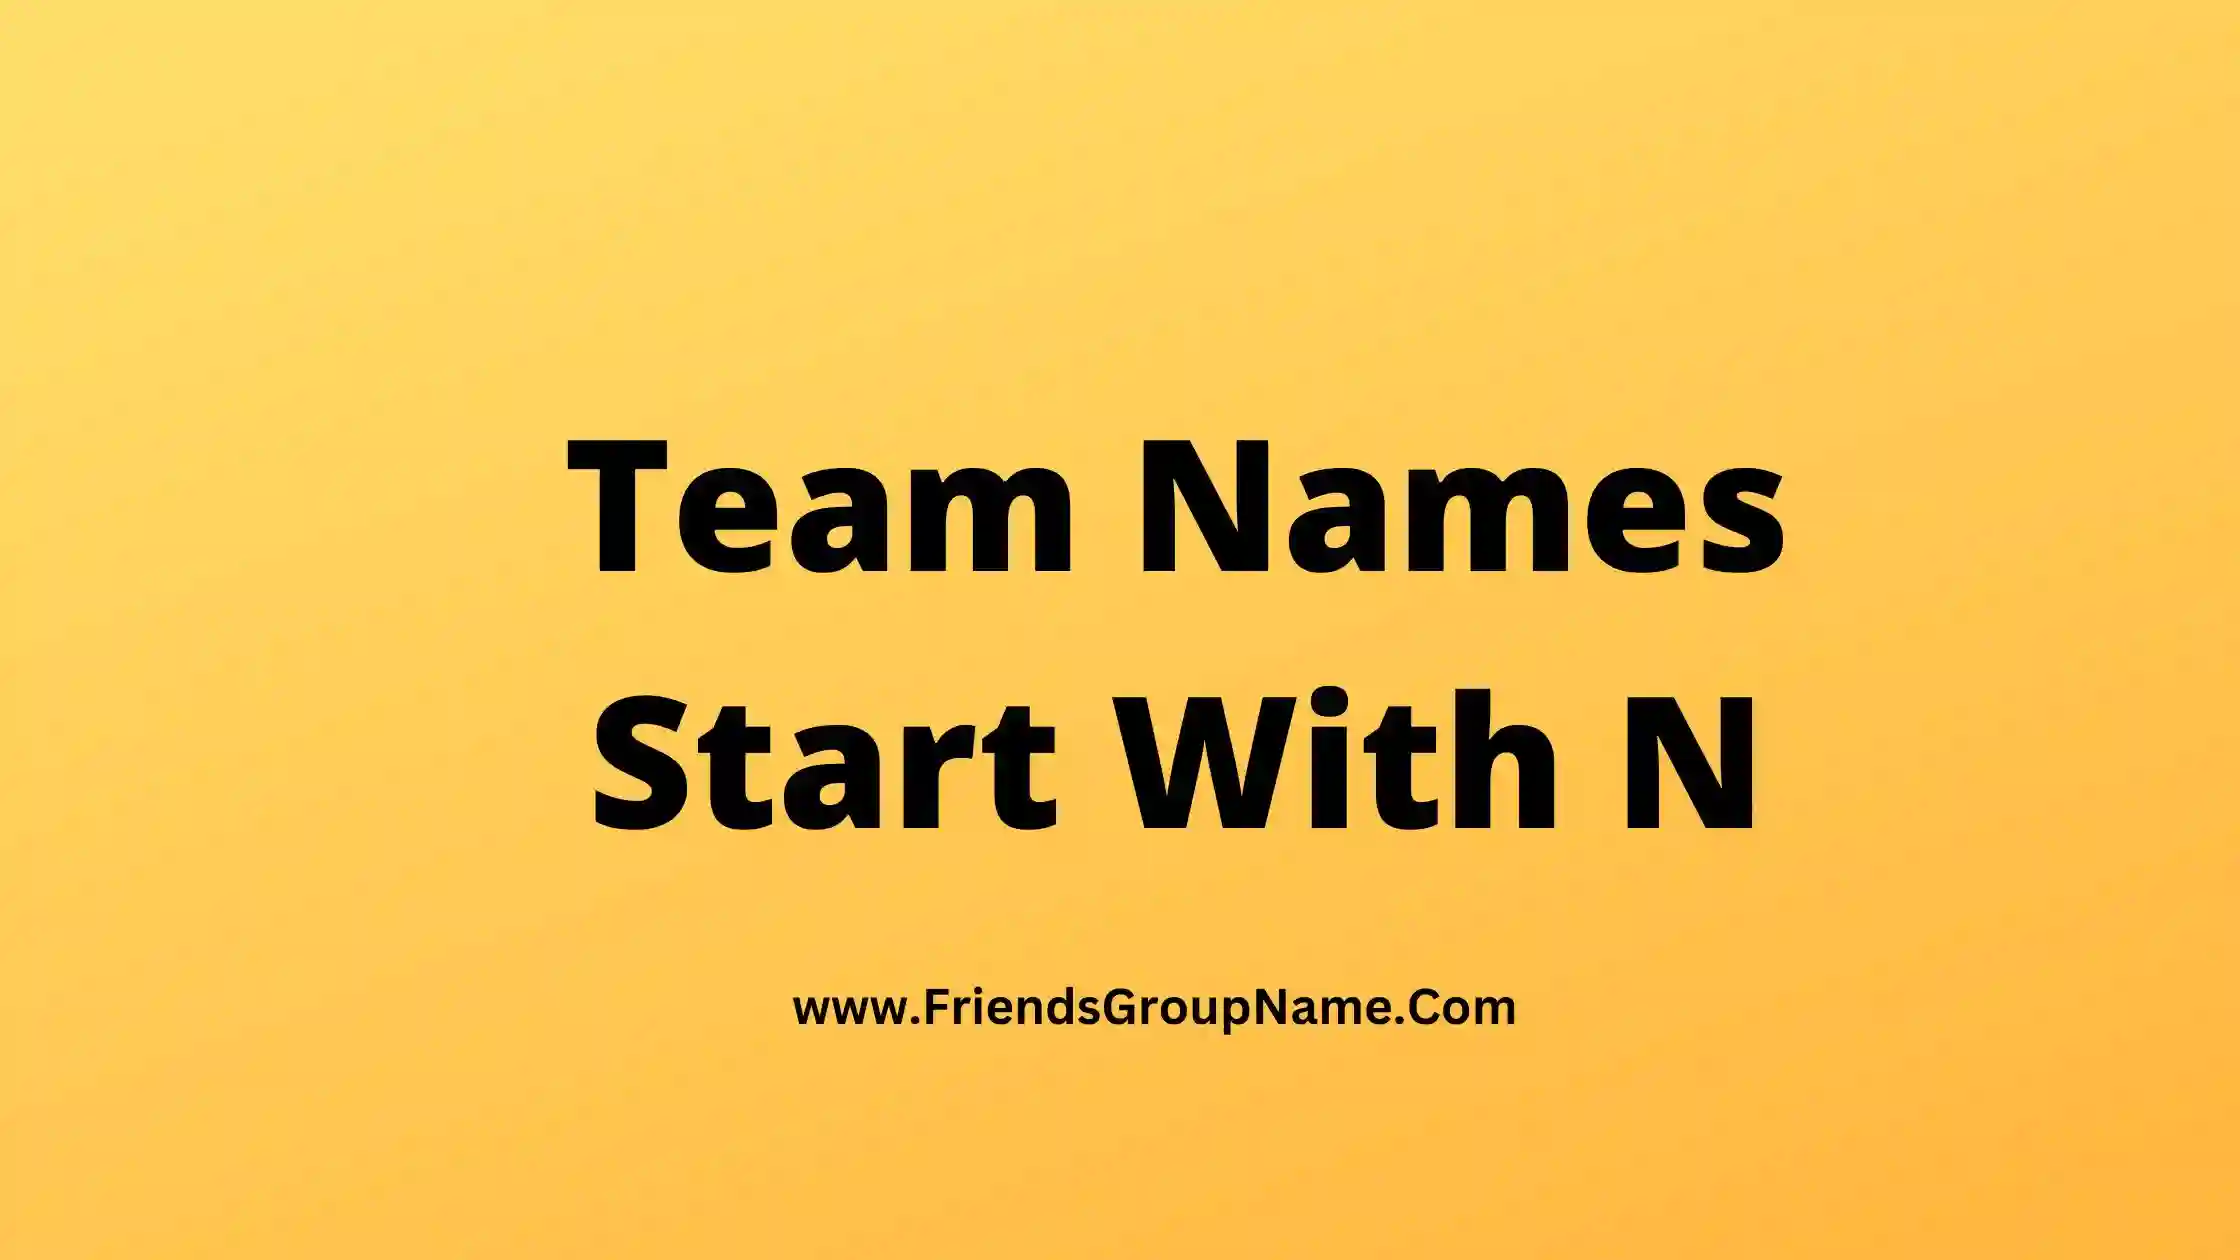 Team Names Start With N